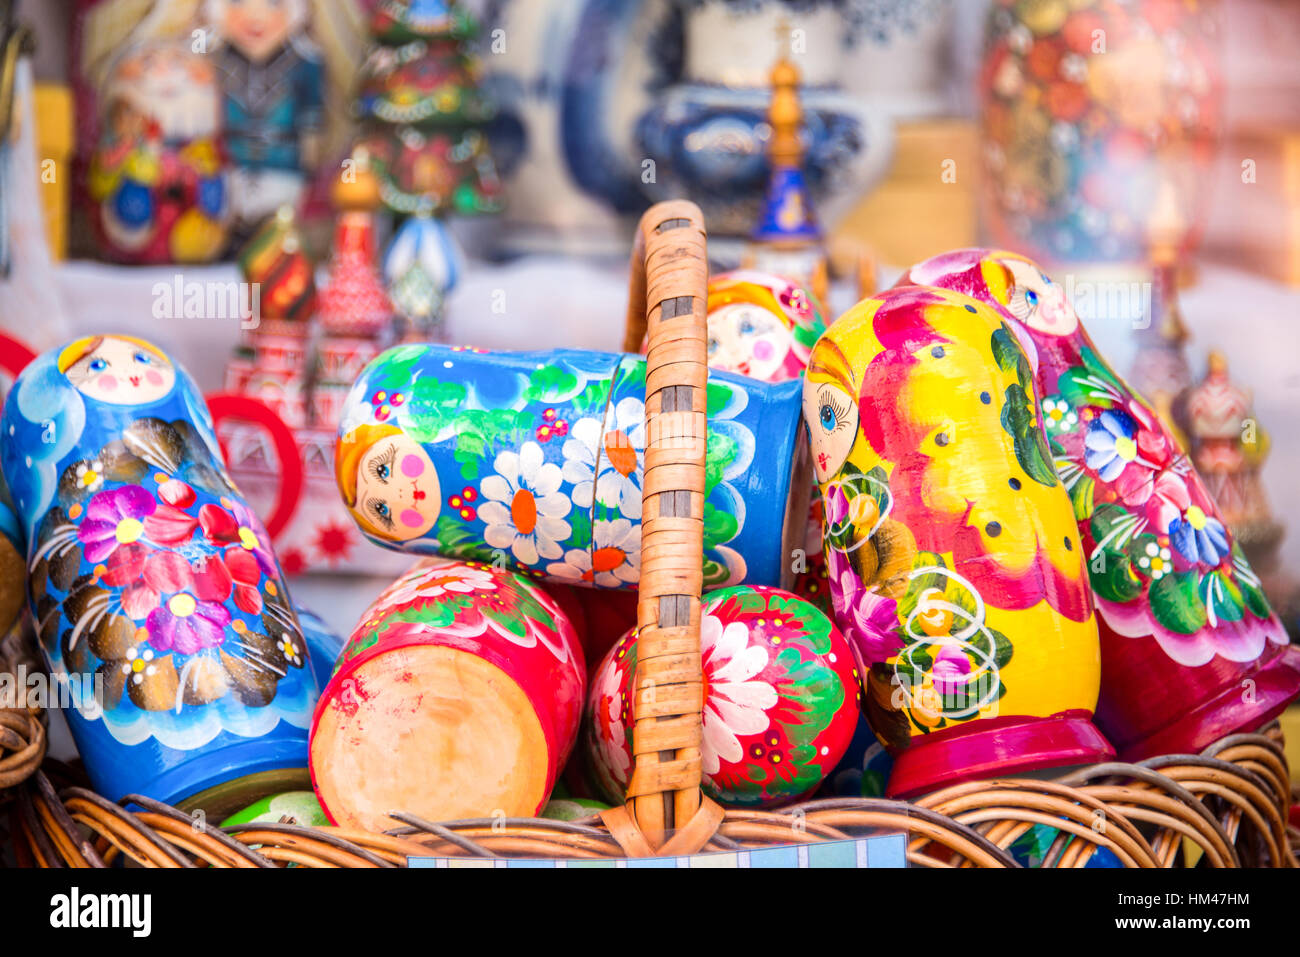 Display of colorful matryoshkas (russian dolls) in Moscow, Russia Stock Photo